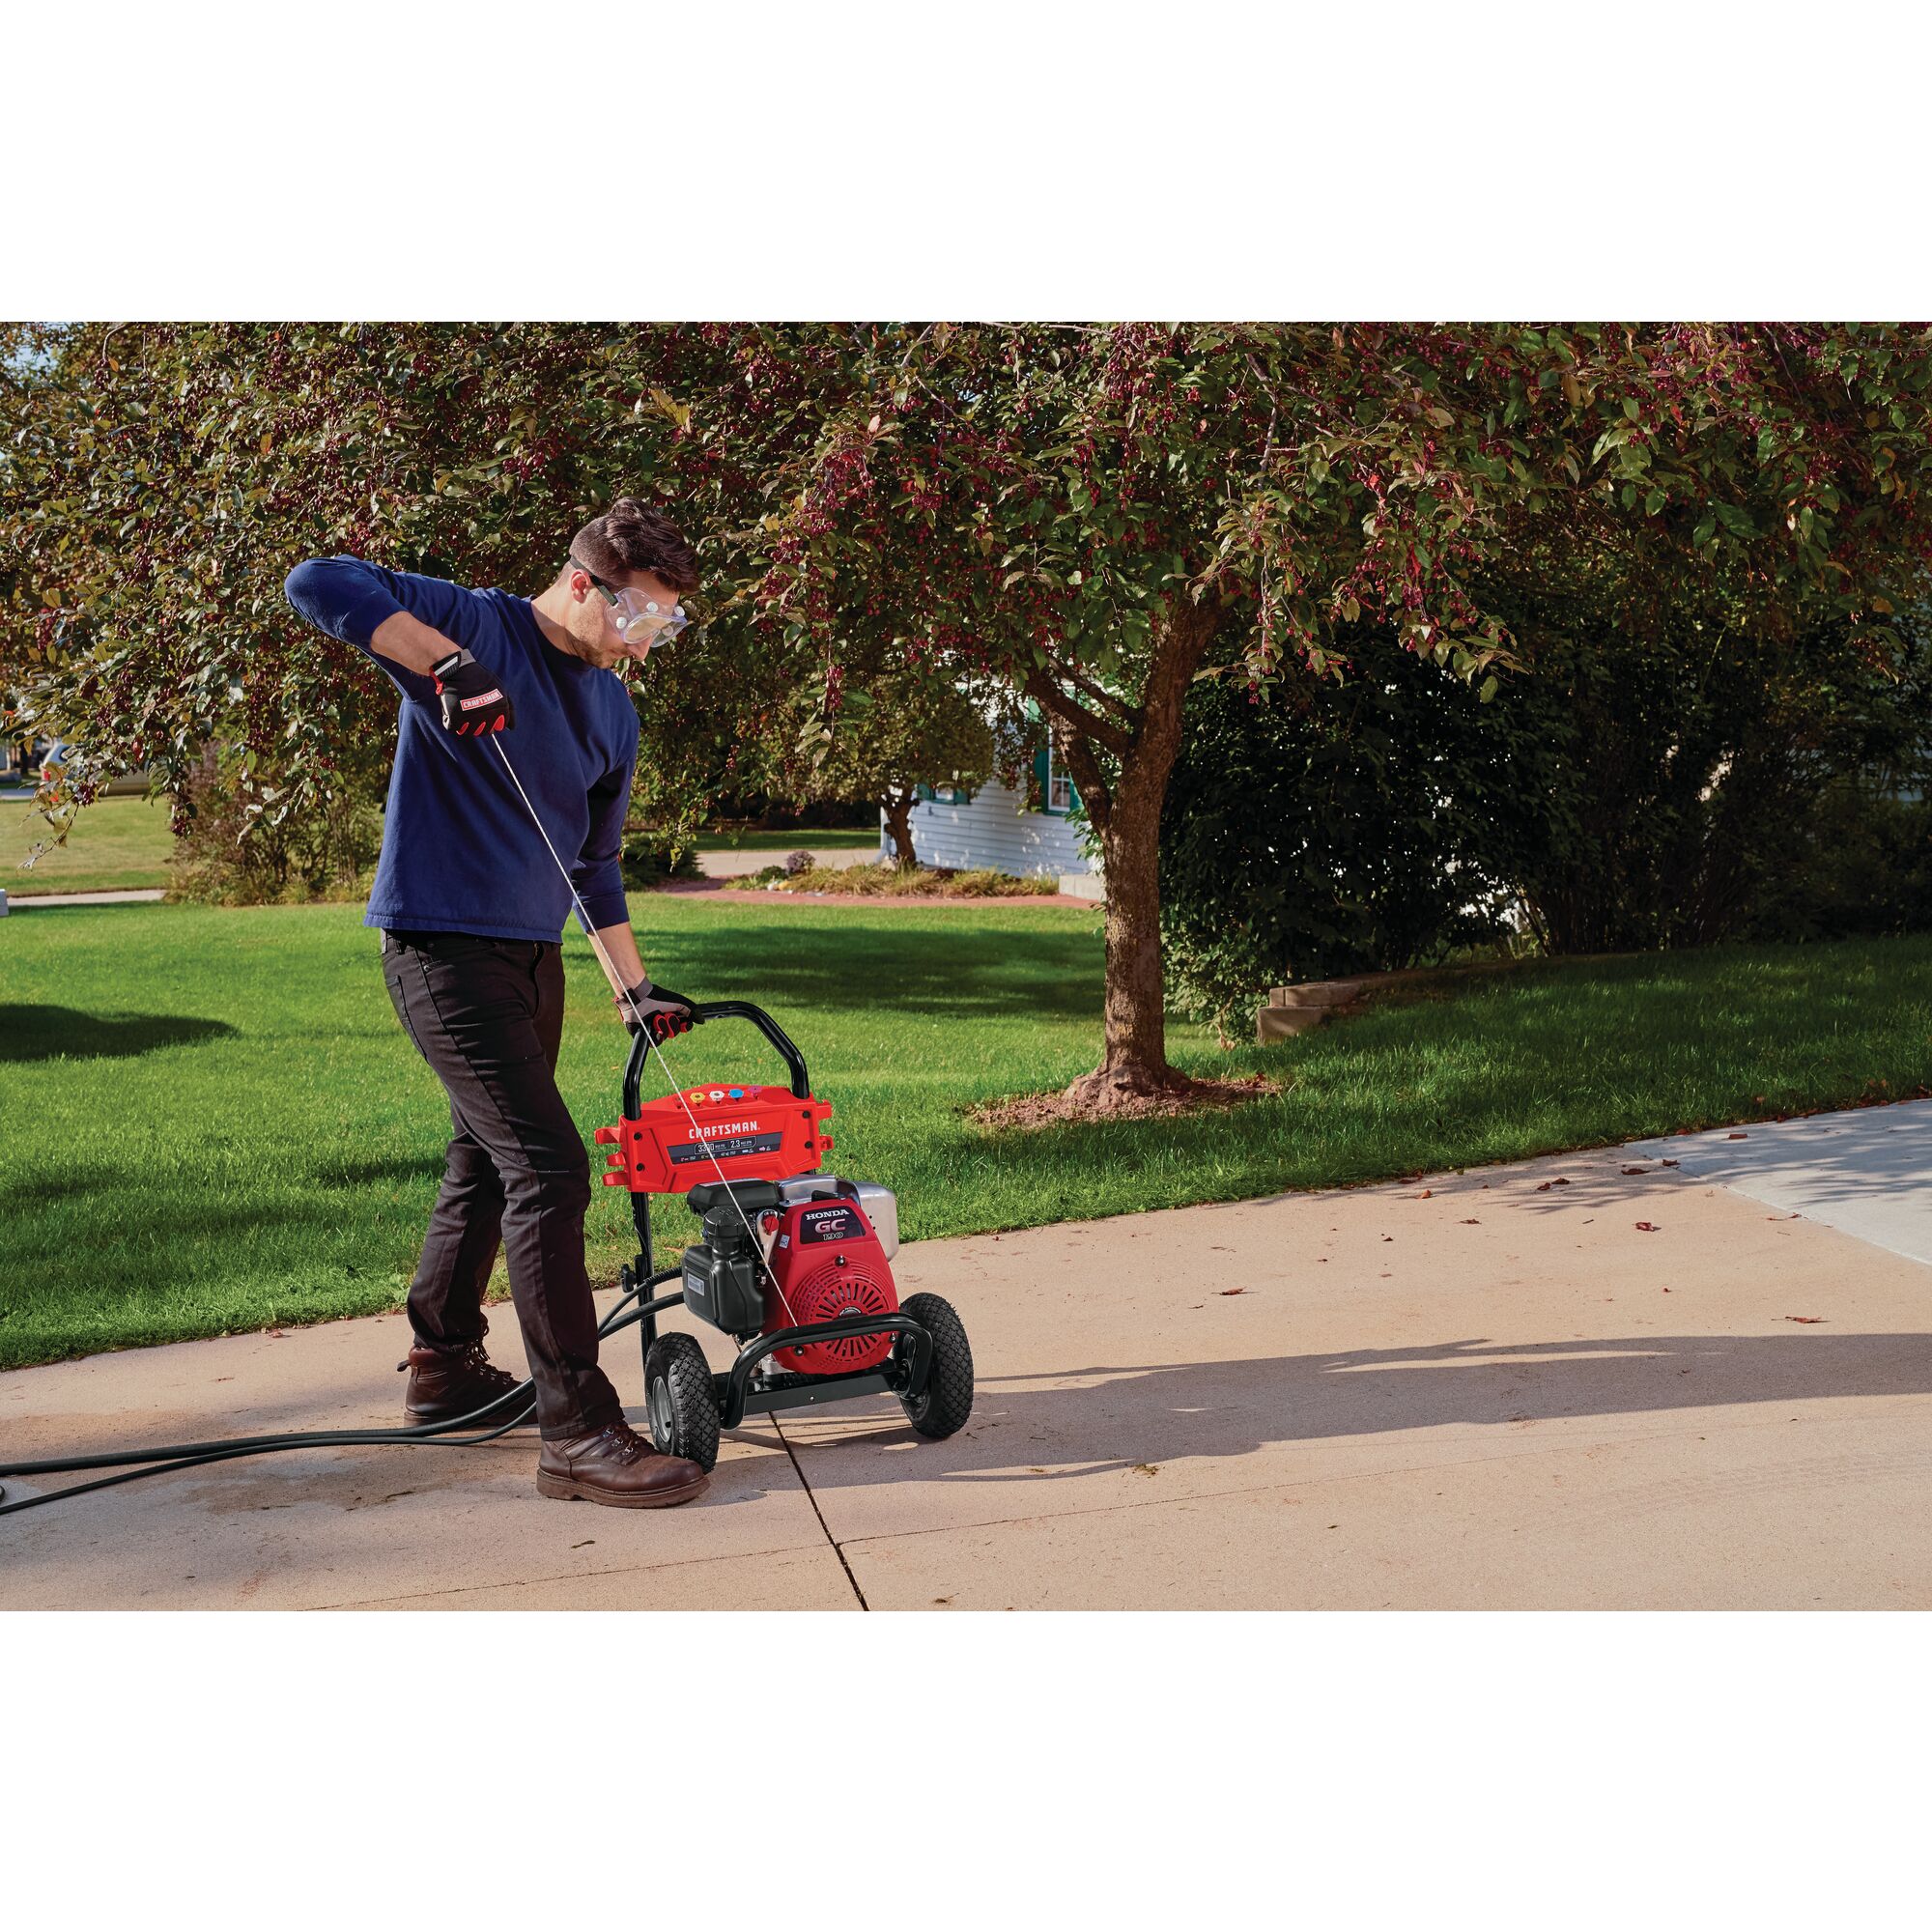 3300 Max P S I / 2.3 max G P M Pressure washer being used by a person to start washer.